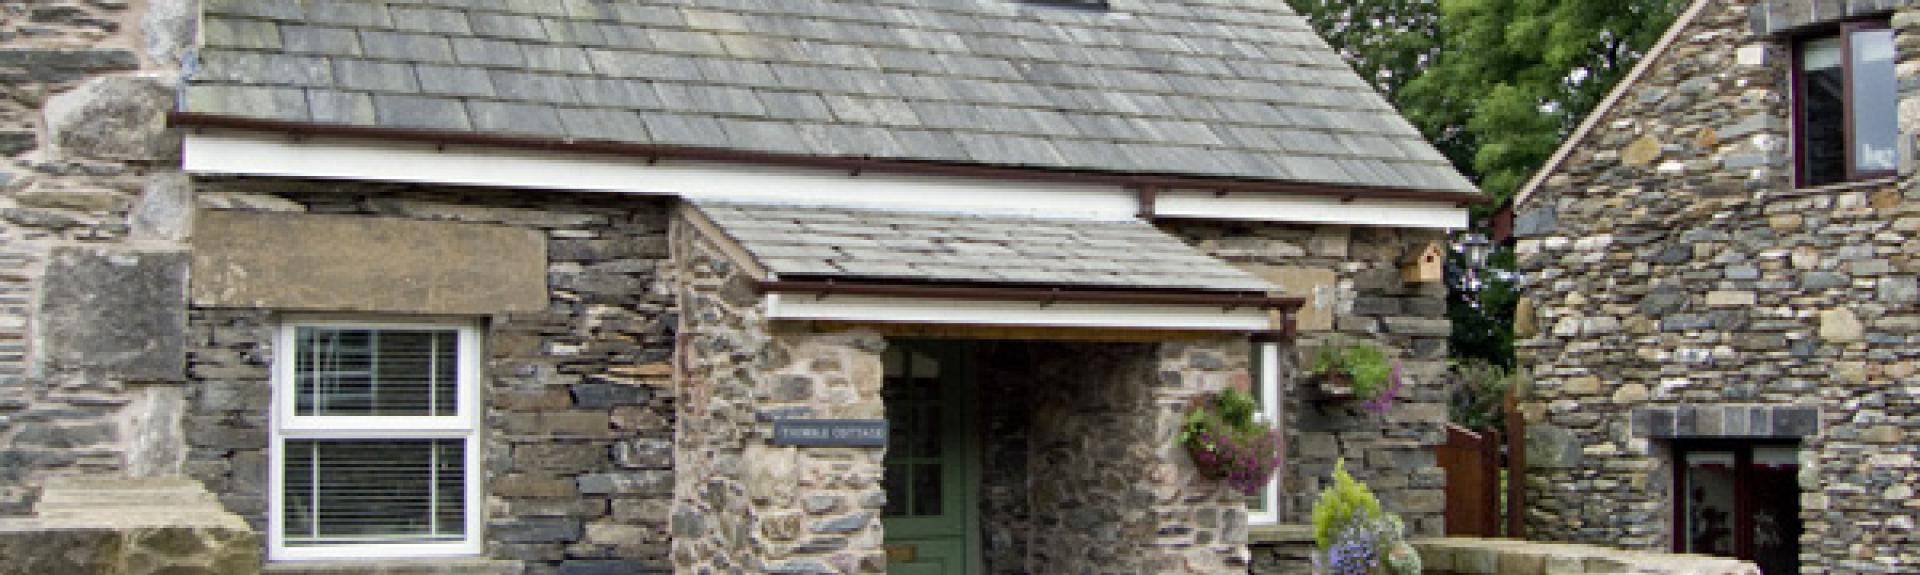 A 2-storey holiday cottage in Ulverston in a convrted stone barn surrounded by a low stone wall.